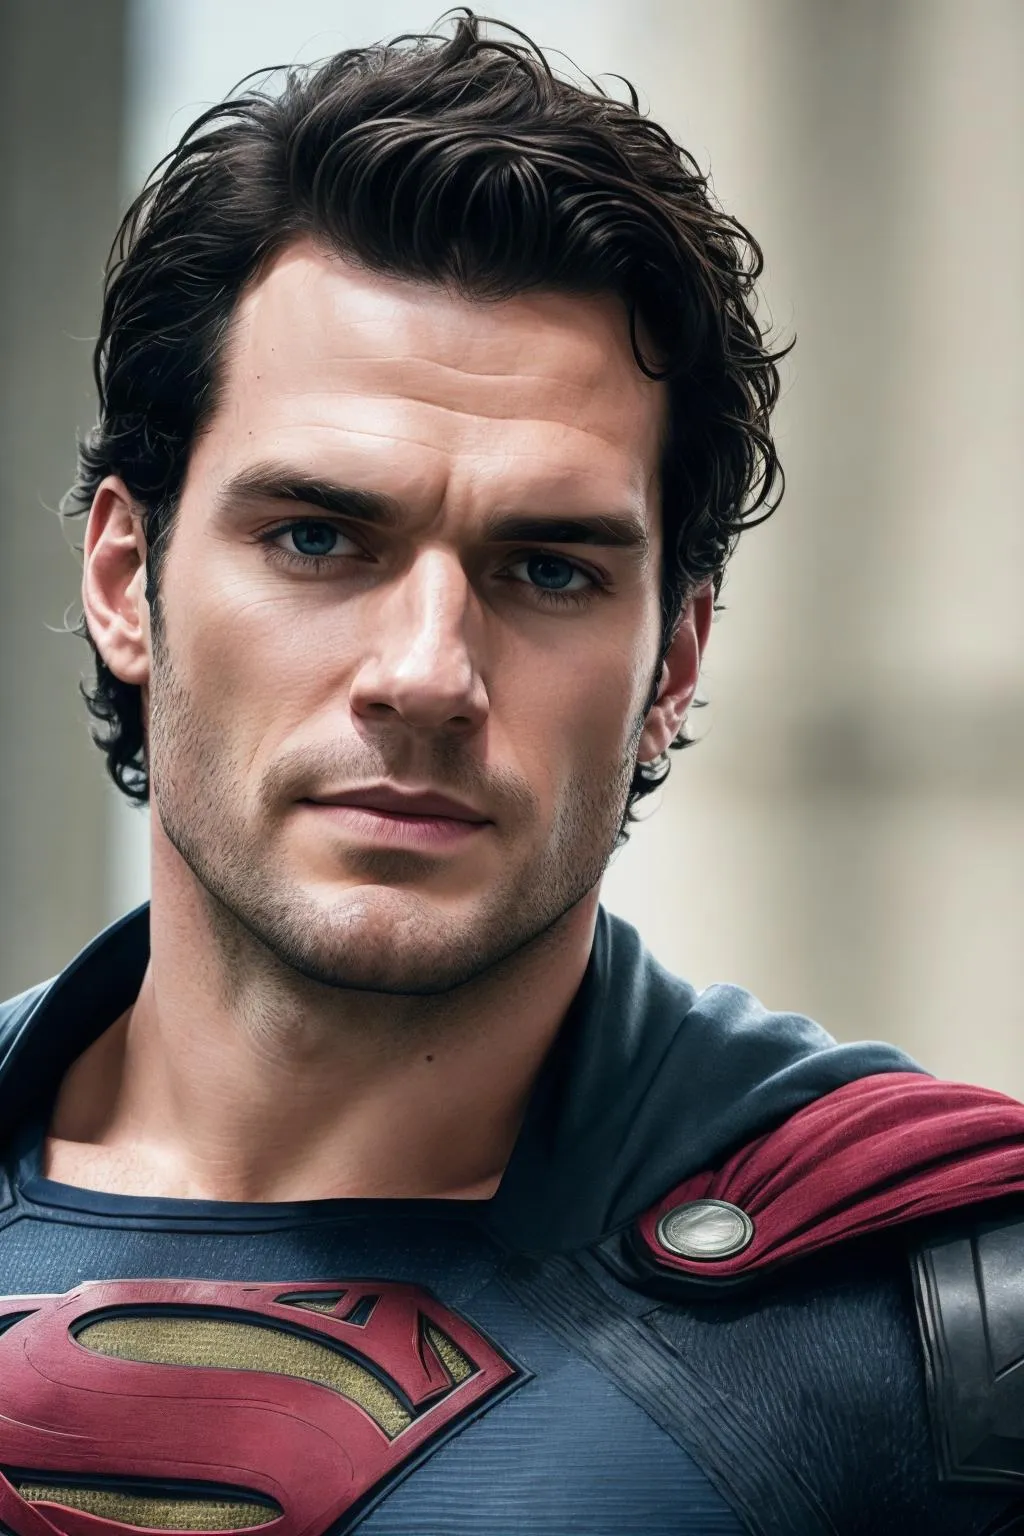 Stunning image of Henry Cavill, a highly sophisticated AI character.